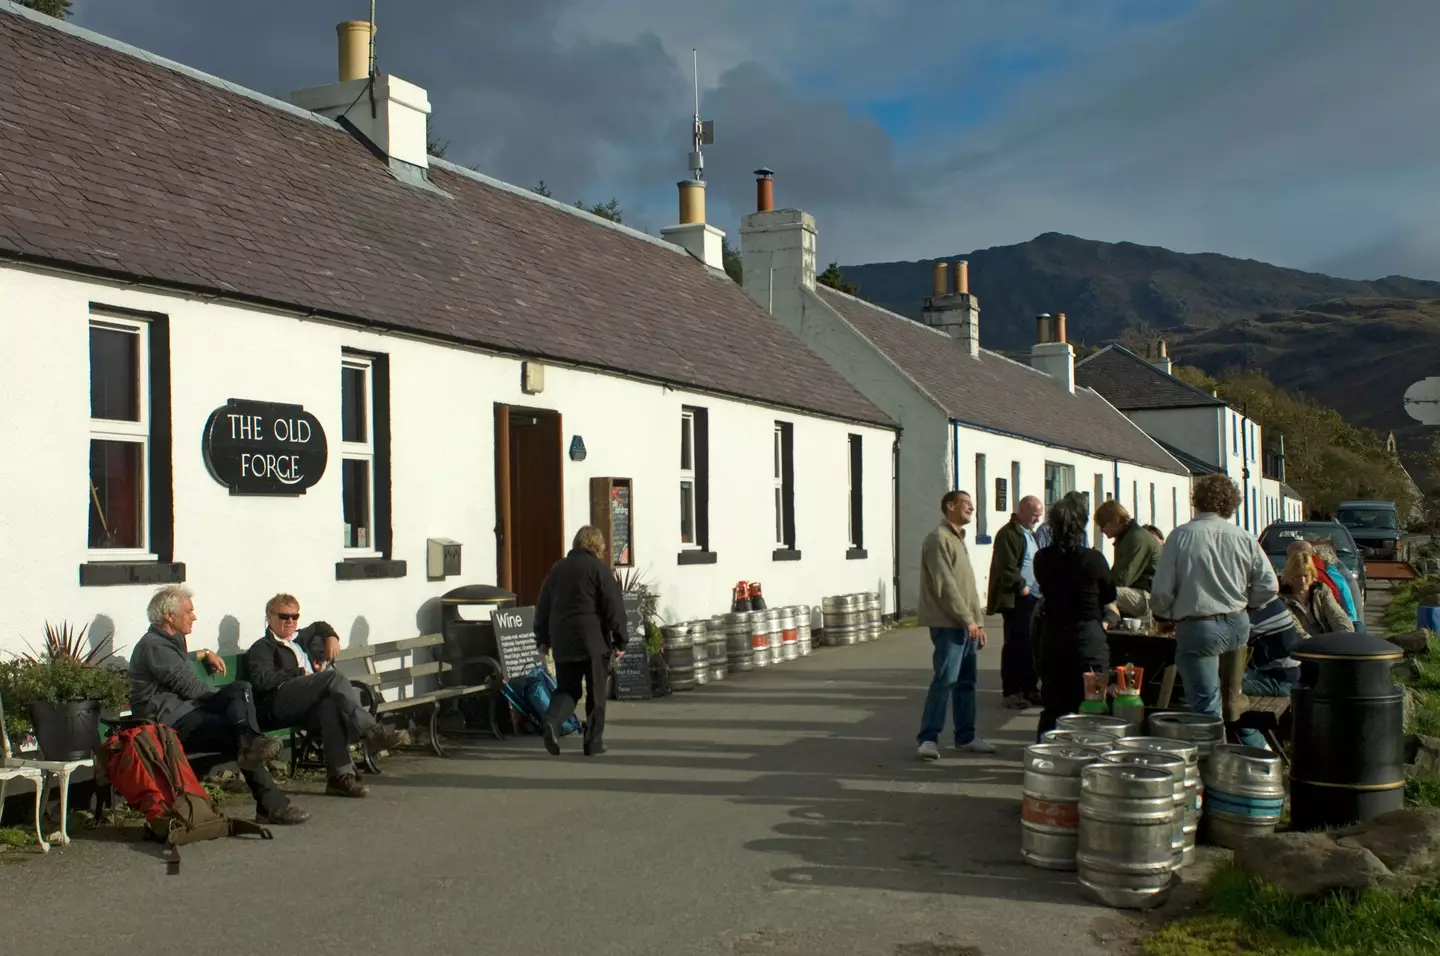 The Old Forge Inn may be the UK's most remote pub.